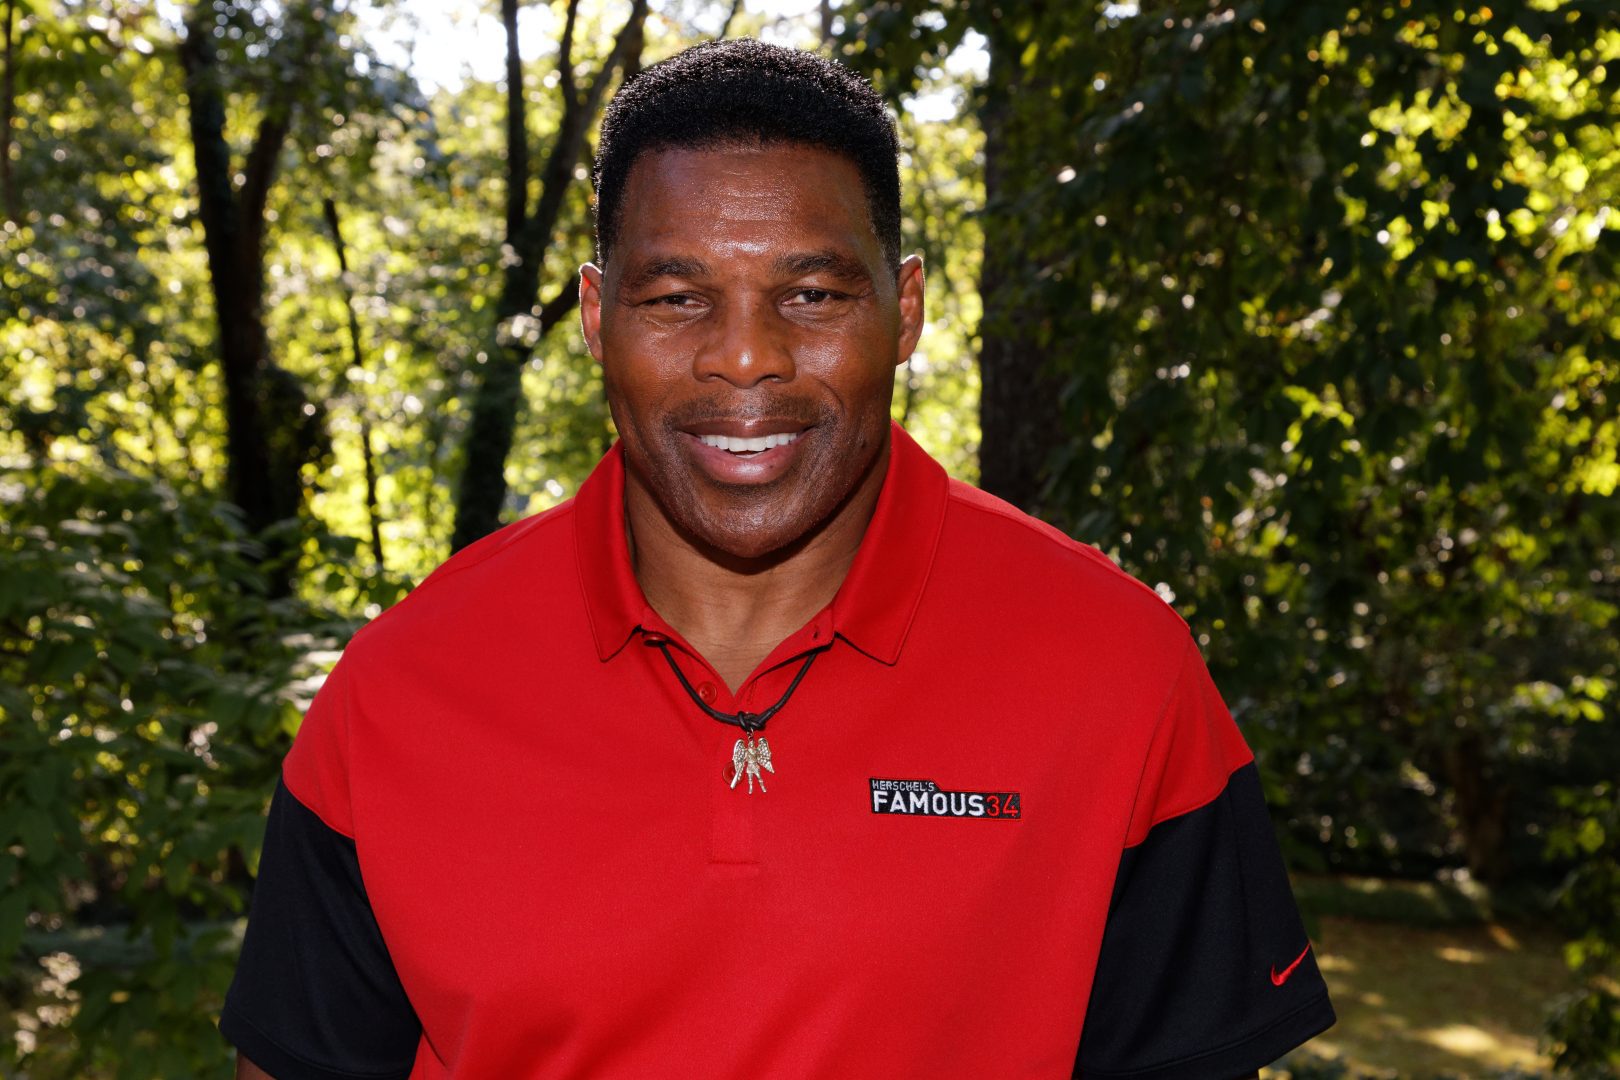 Herschel Walker addresses the domestic abuse accusations against him (part 2)